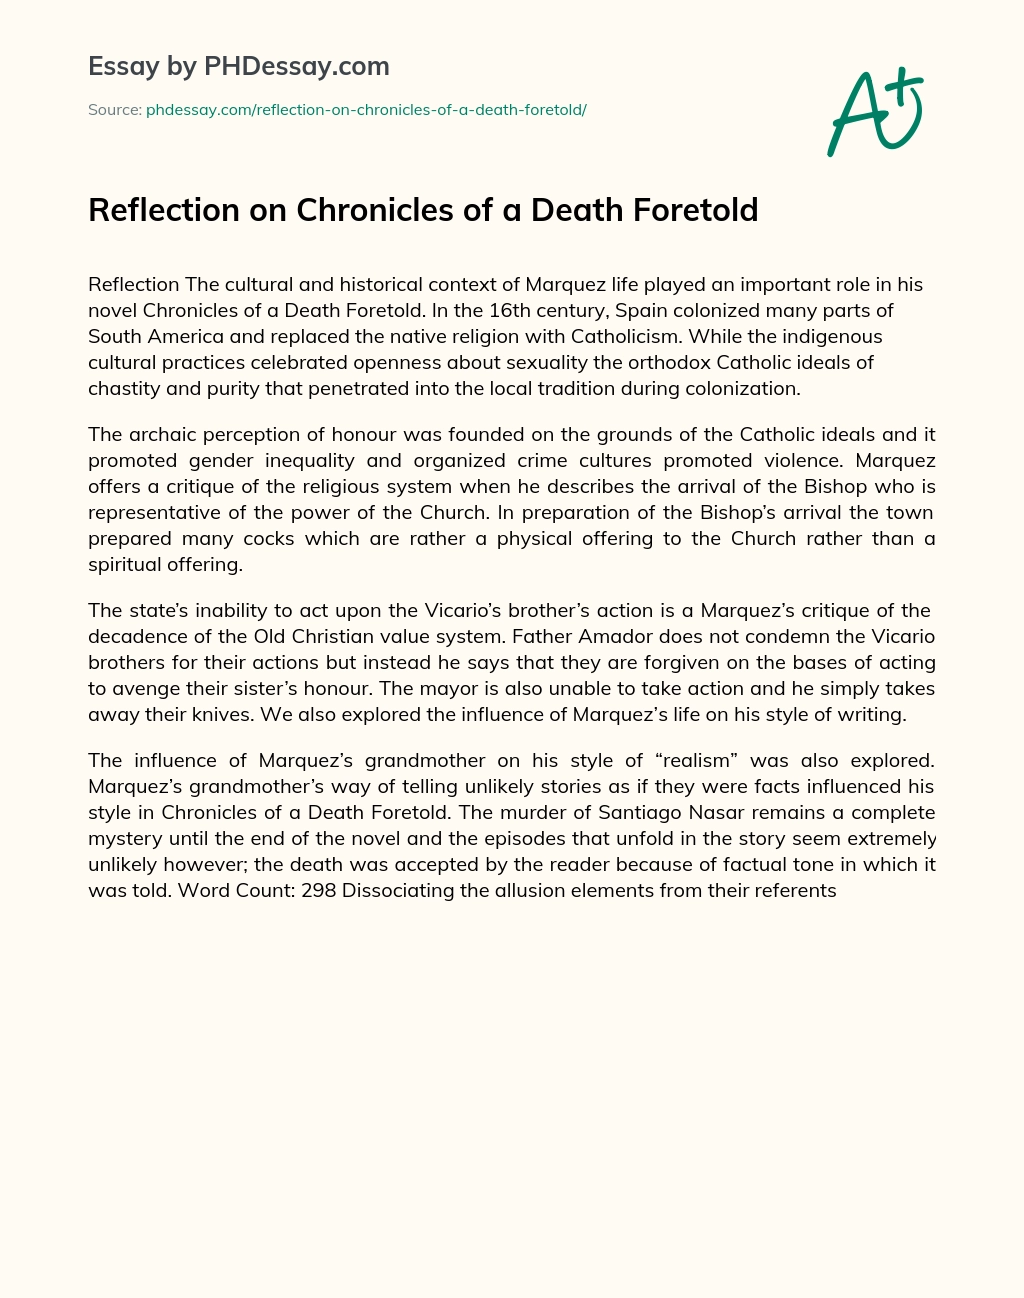 Reflection on Chronicles of a Death Foretold essay